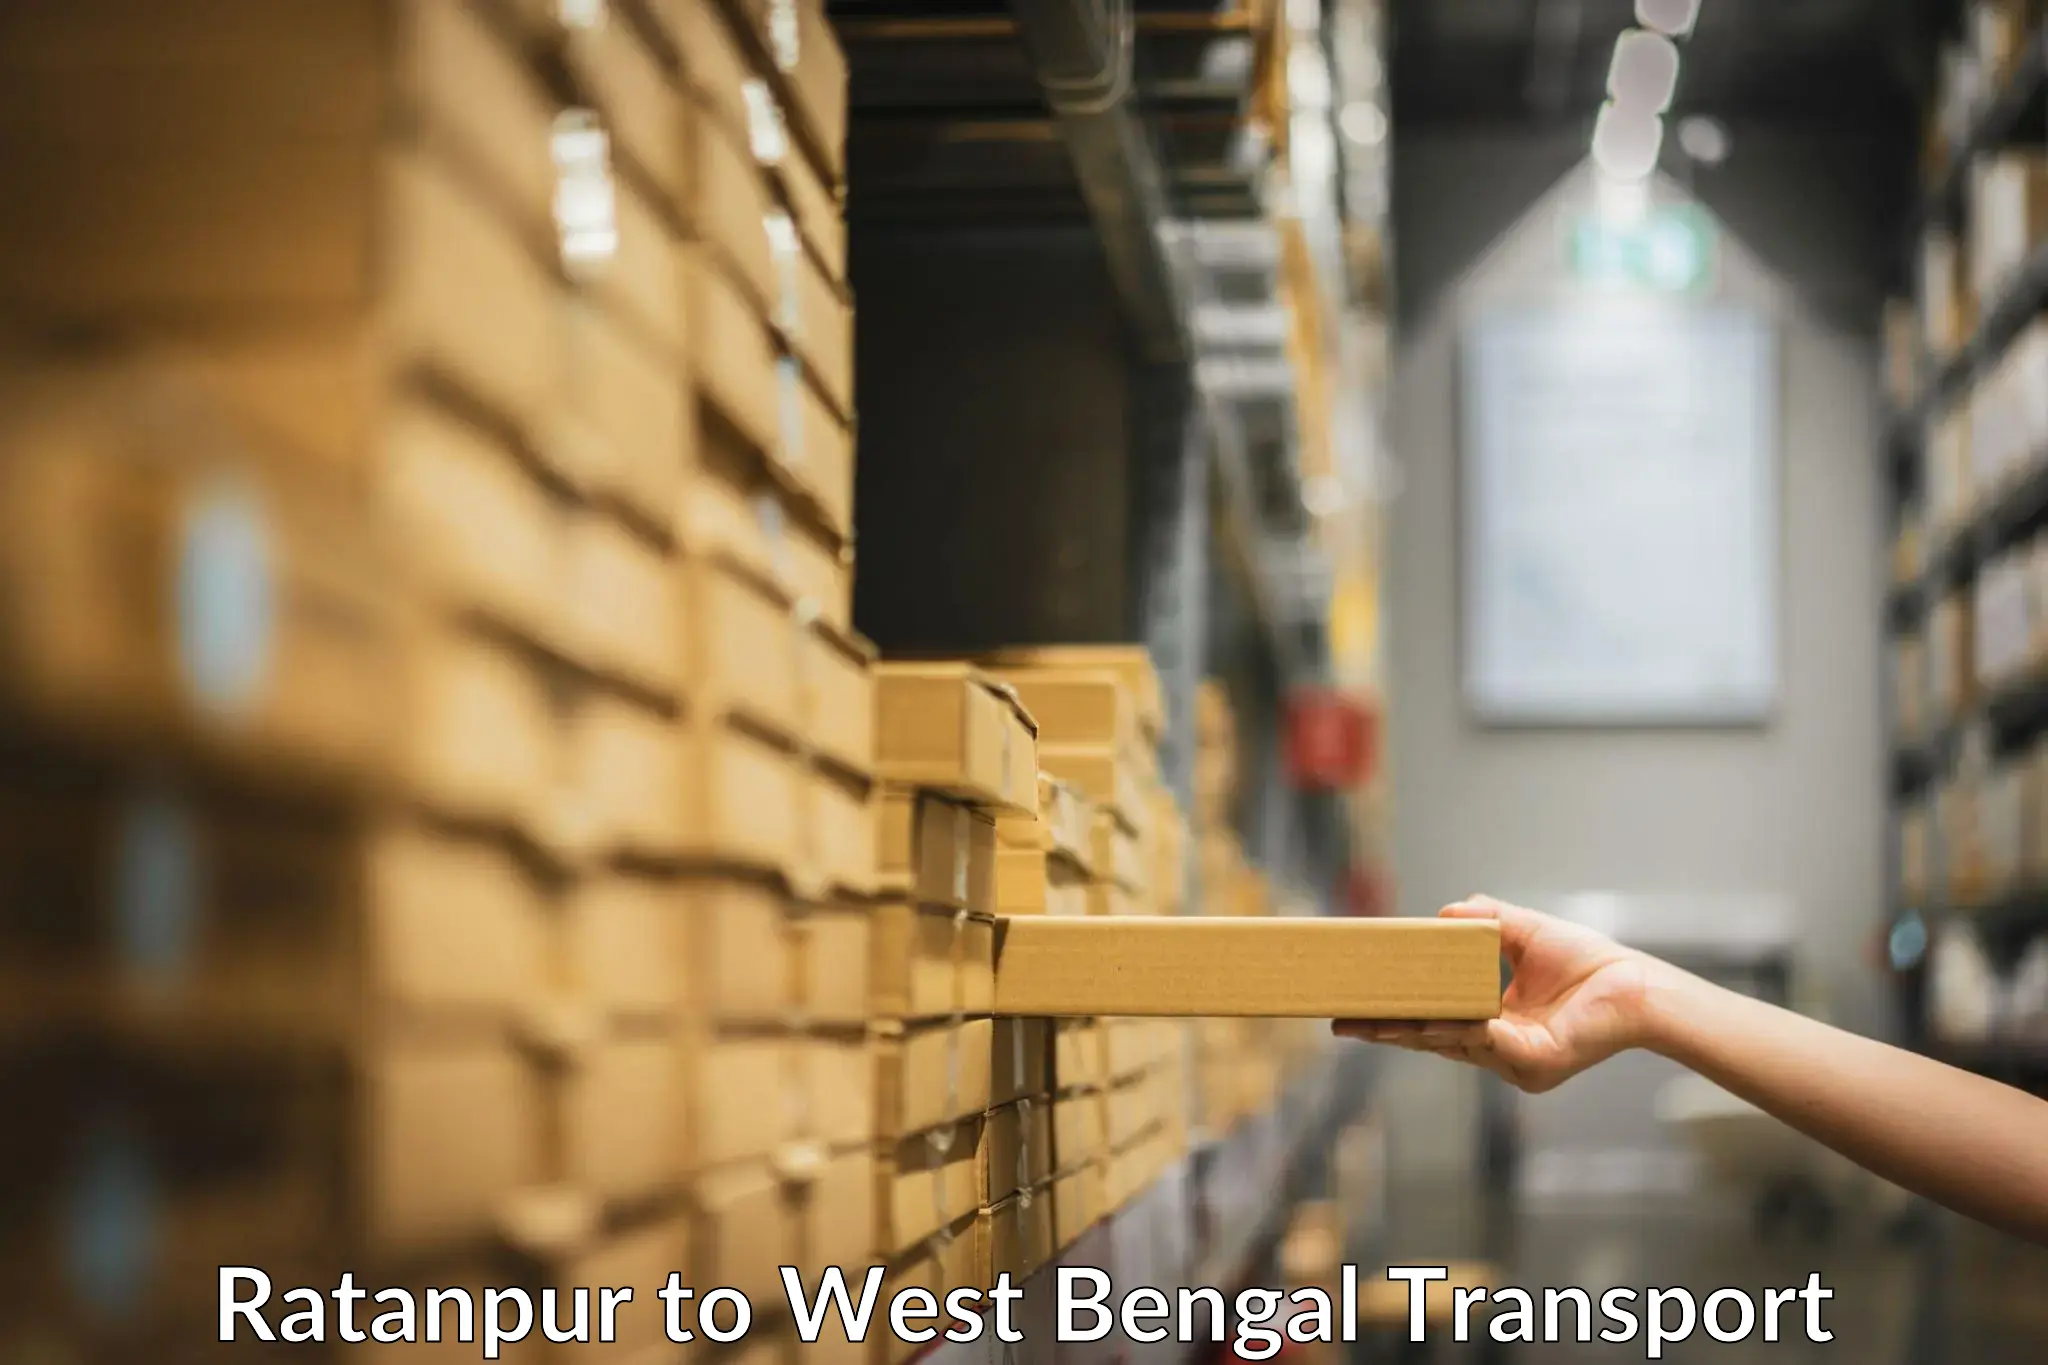 Nearby transport service Ratanpur to West Bengal